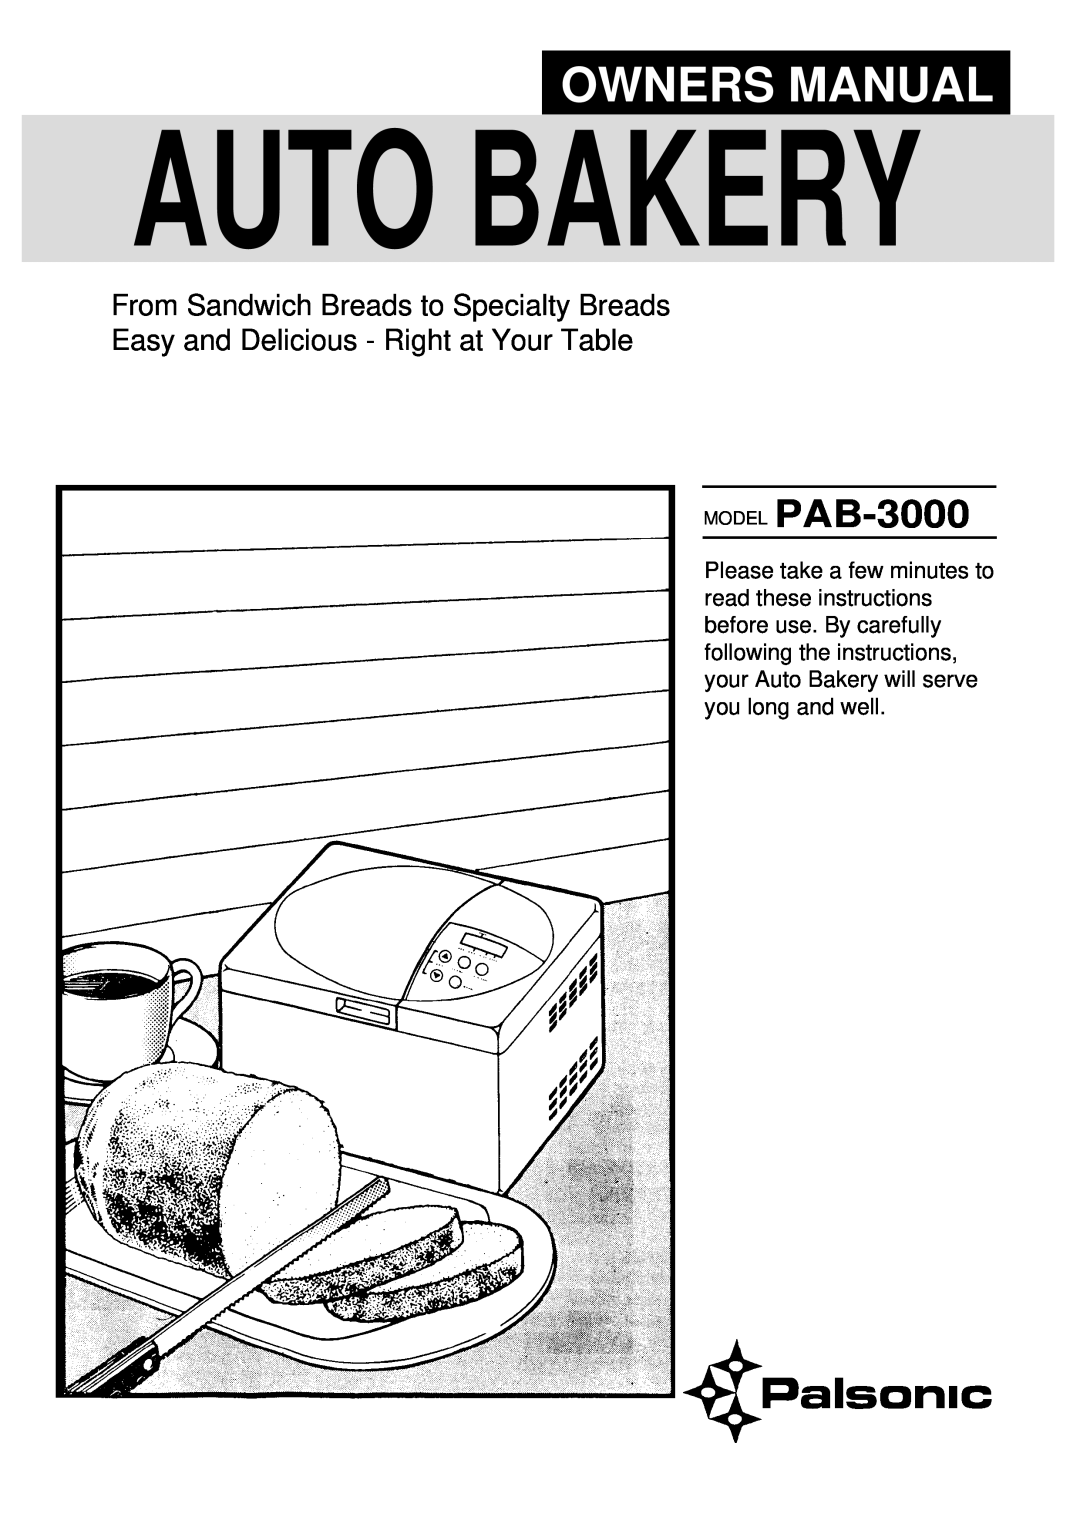 Palsonic owner manual Auto Bakery, MODEL PAB-3000, From Sandwich Breads to Specialty Breads 